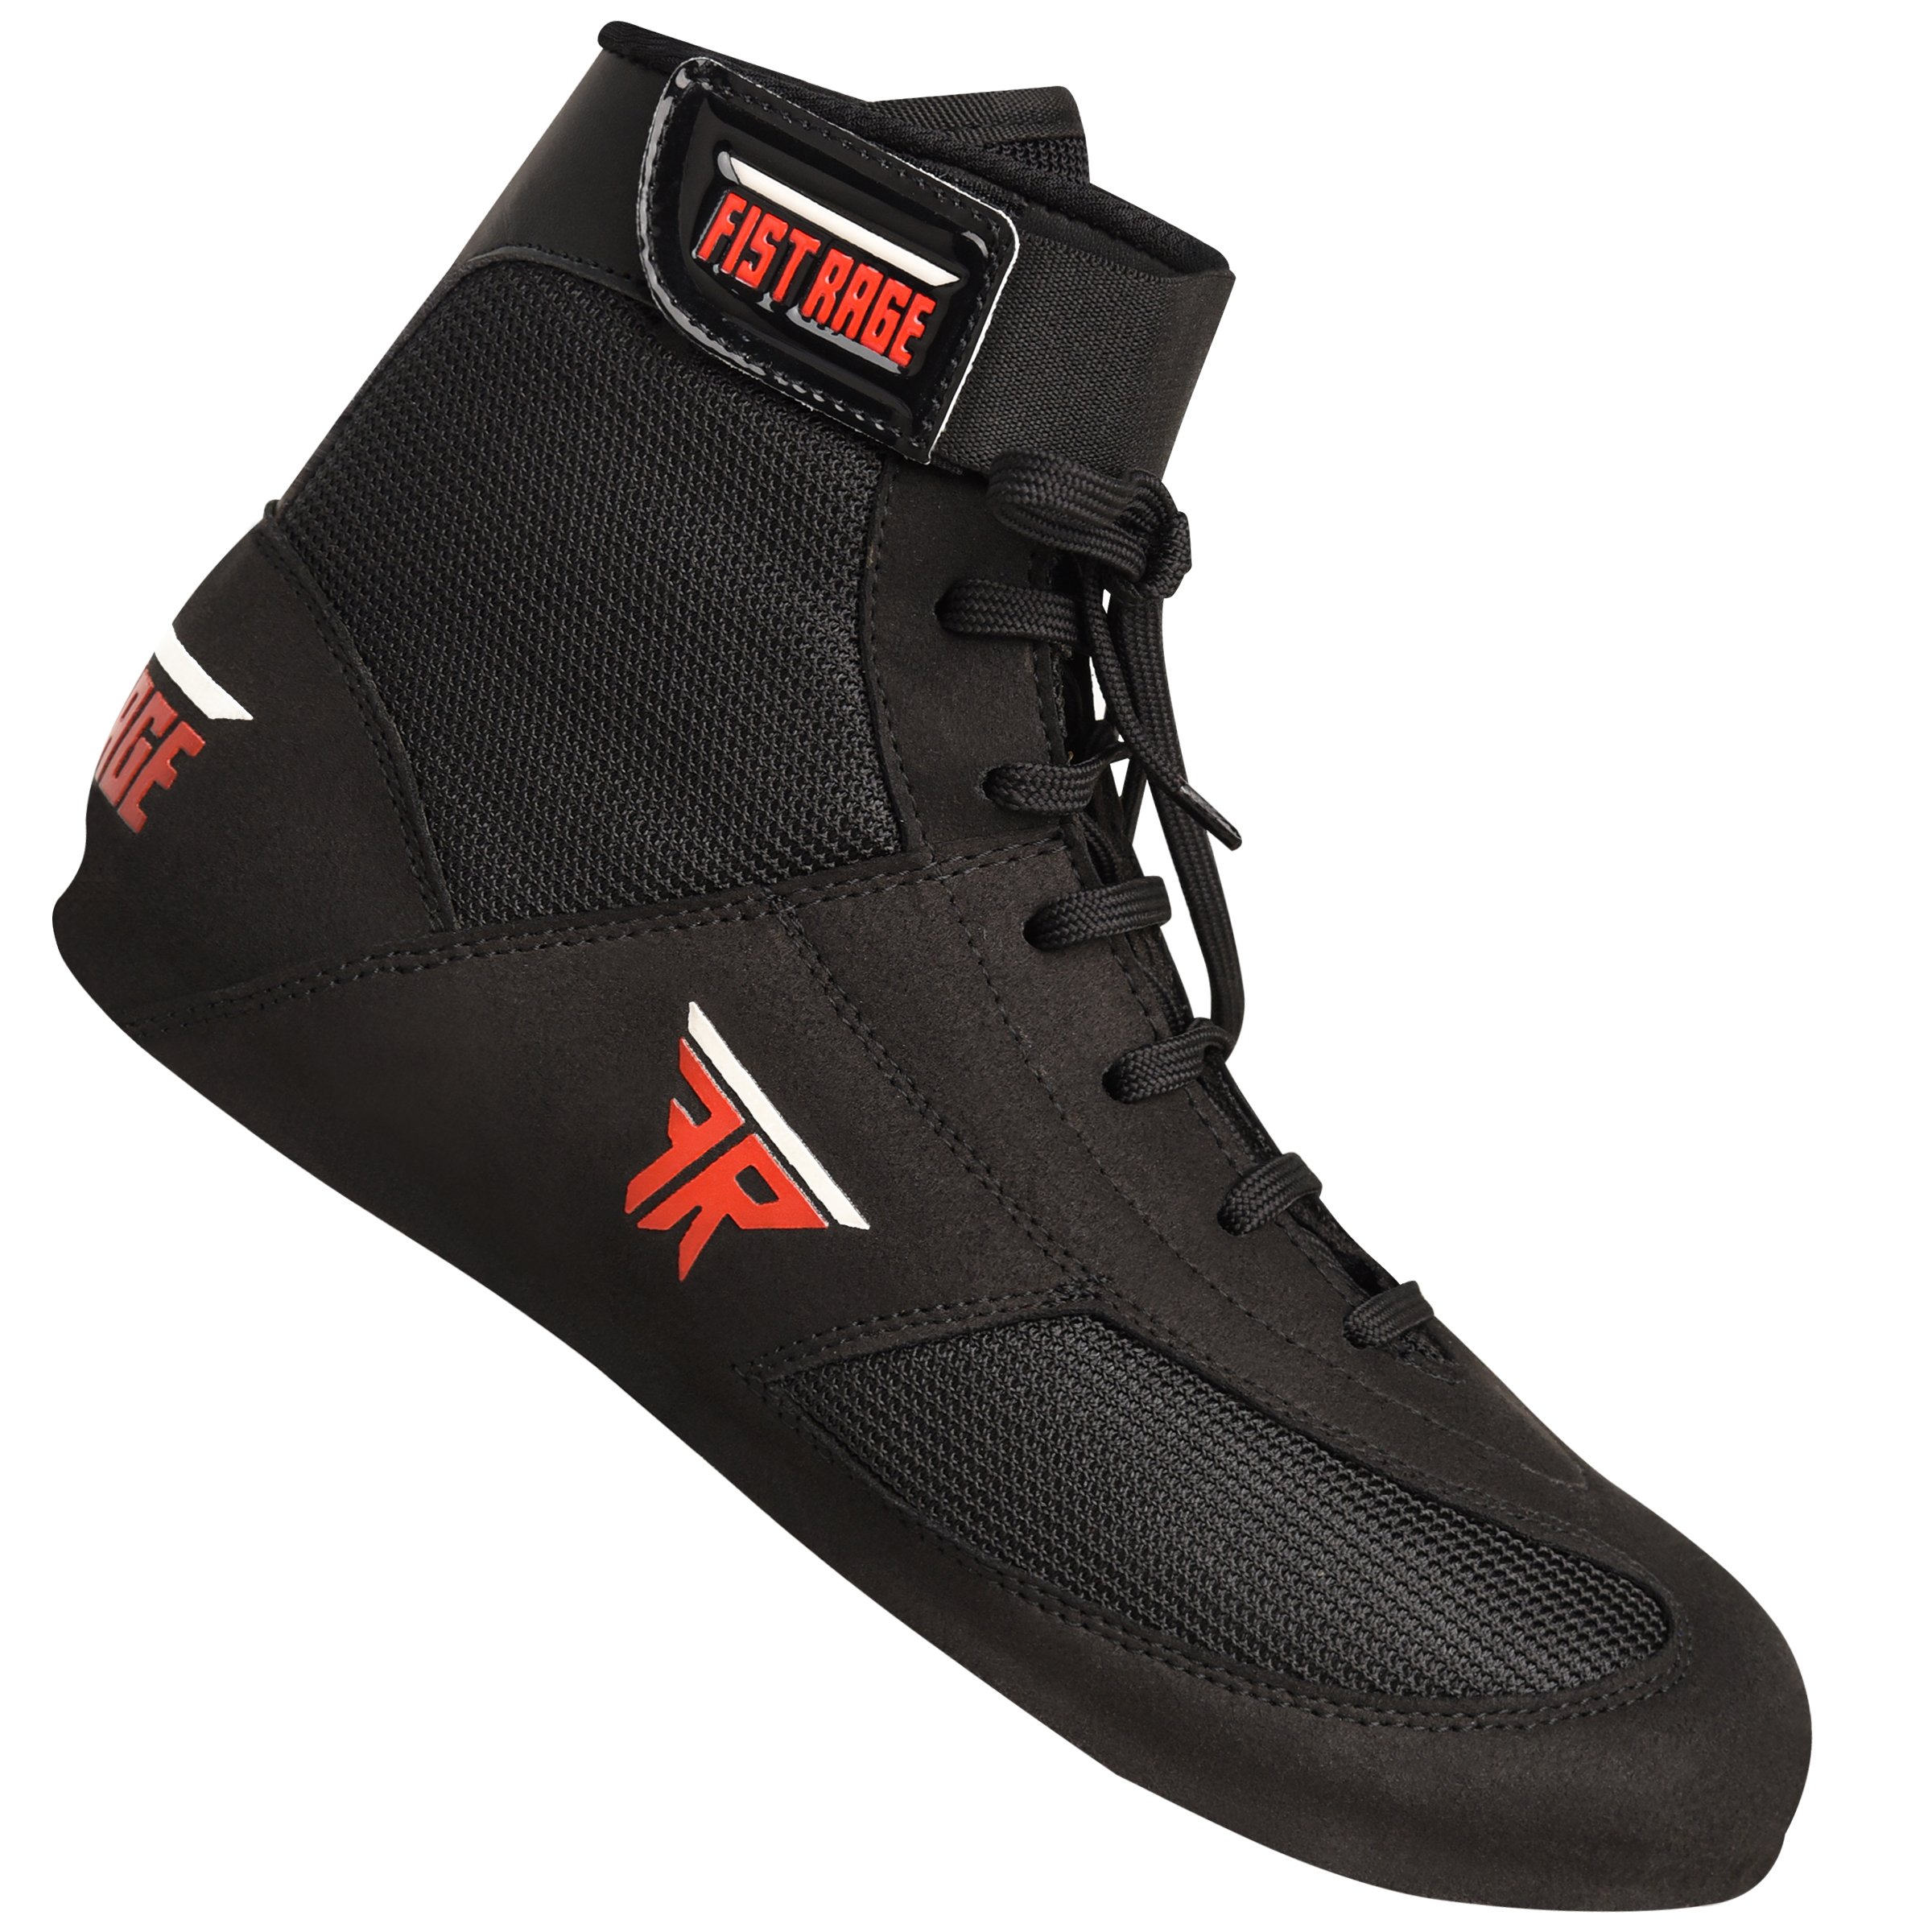 FISTRAGE HALF BOXING SHOES - image 2 of 8